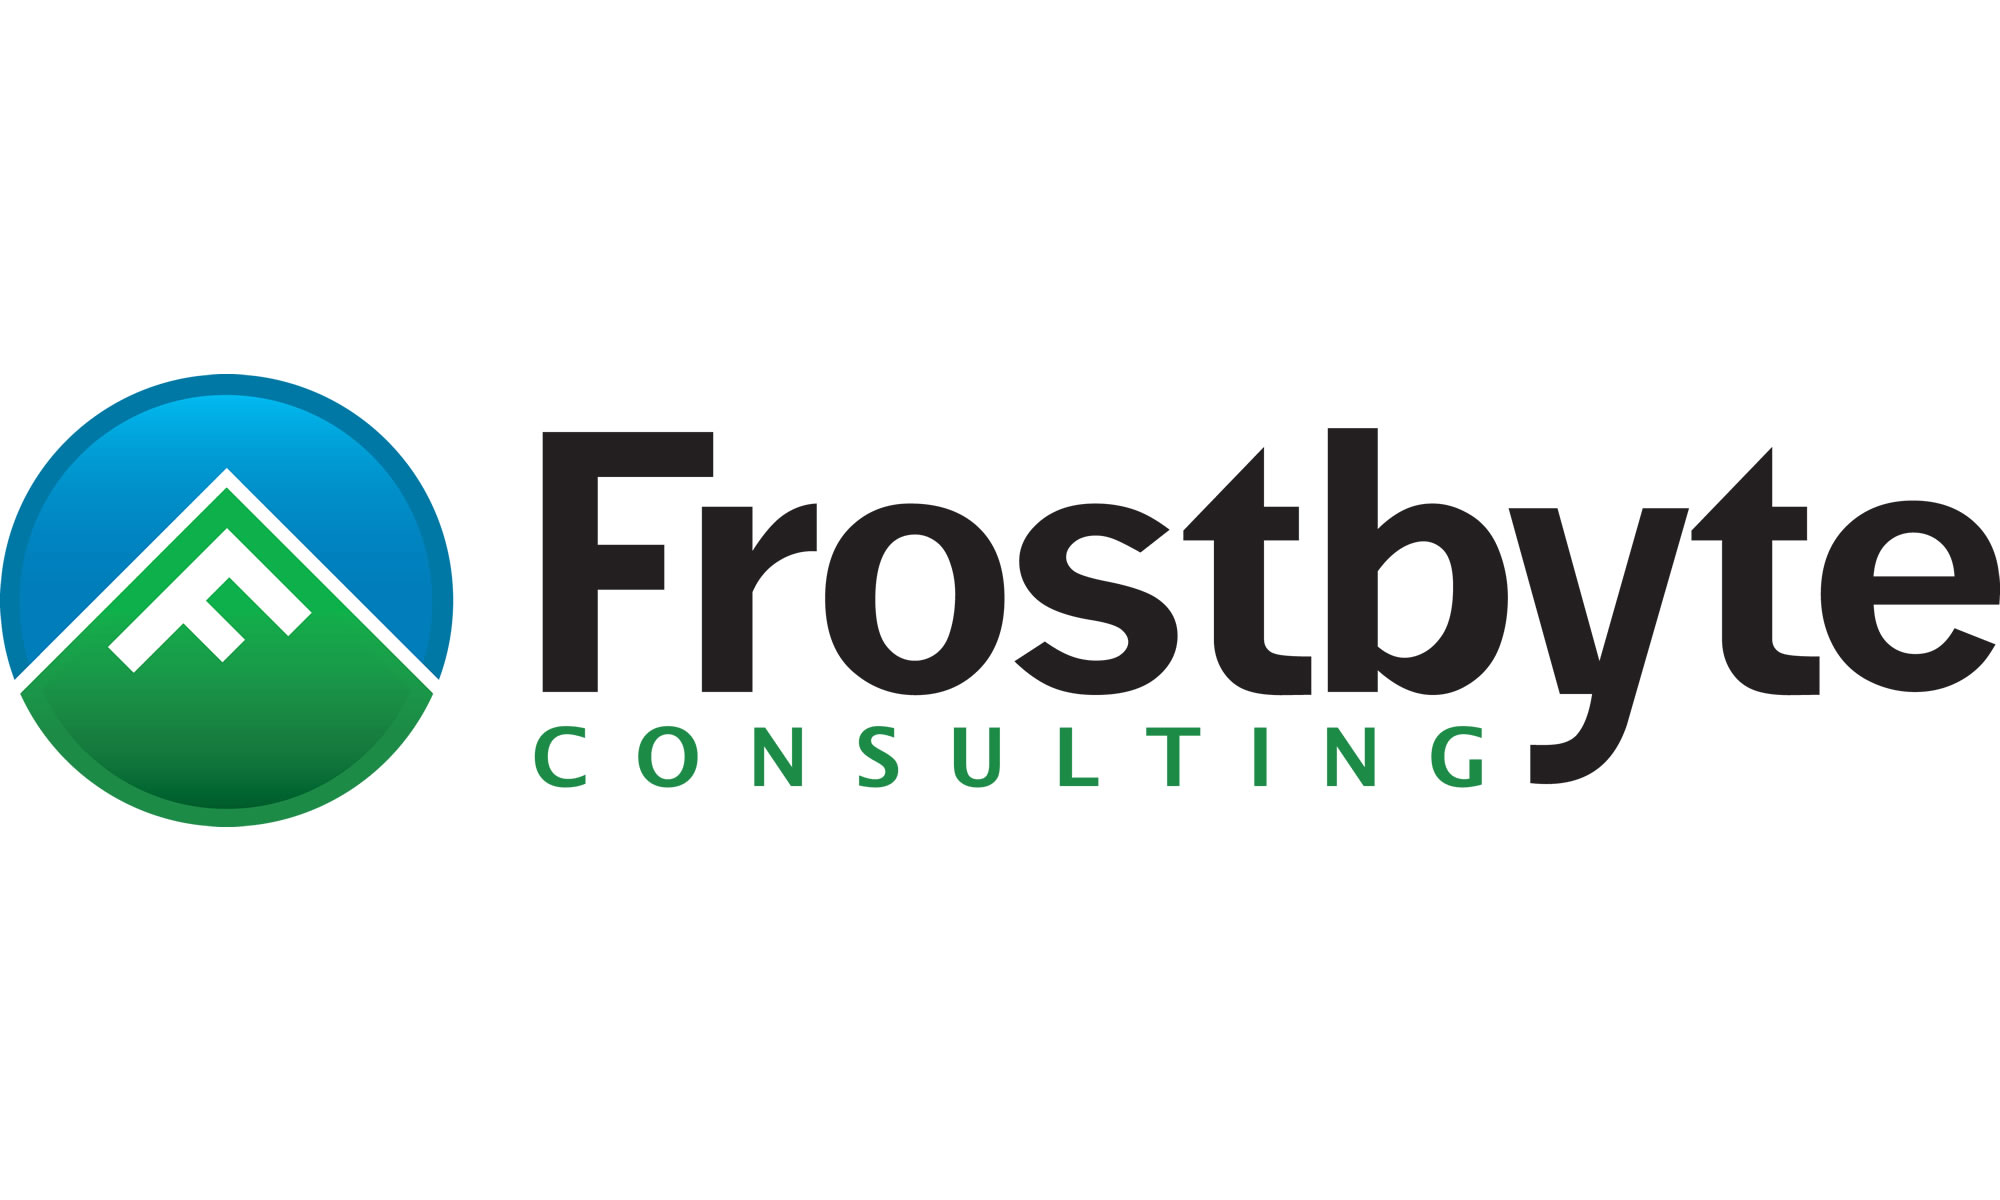 Frostbyte Consulting is a global leader in EHS business information solutions, with expertise in software, sustainability and more. Find out how we can help.